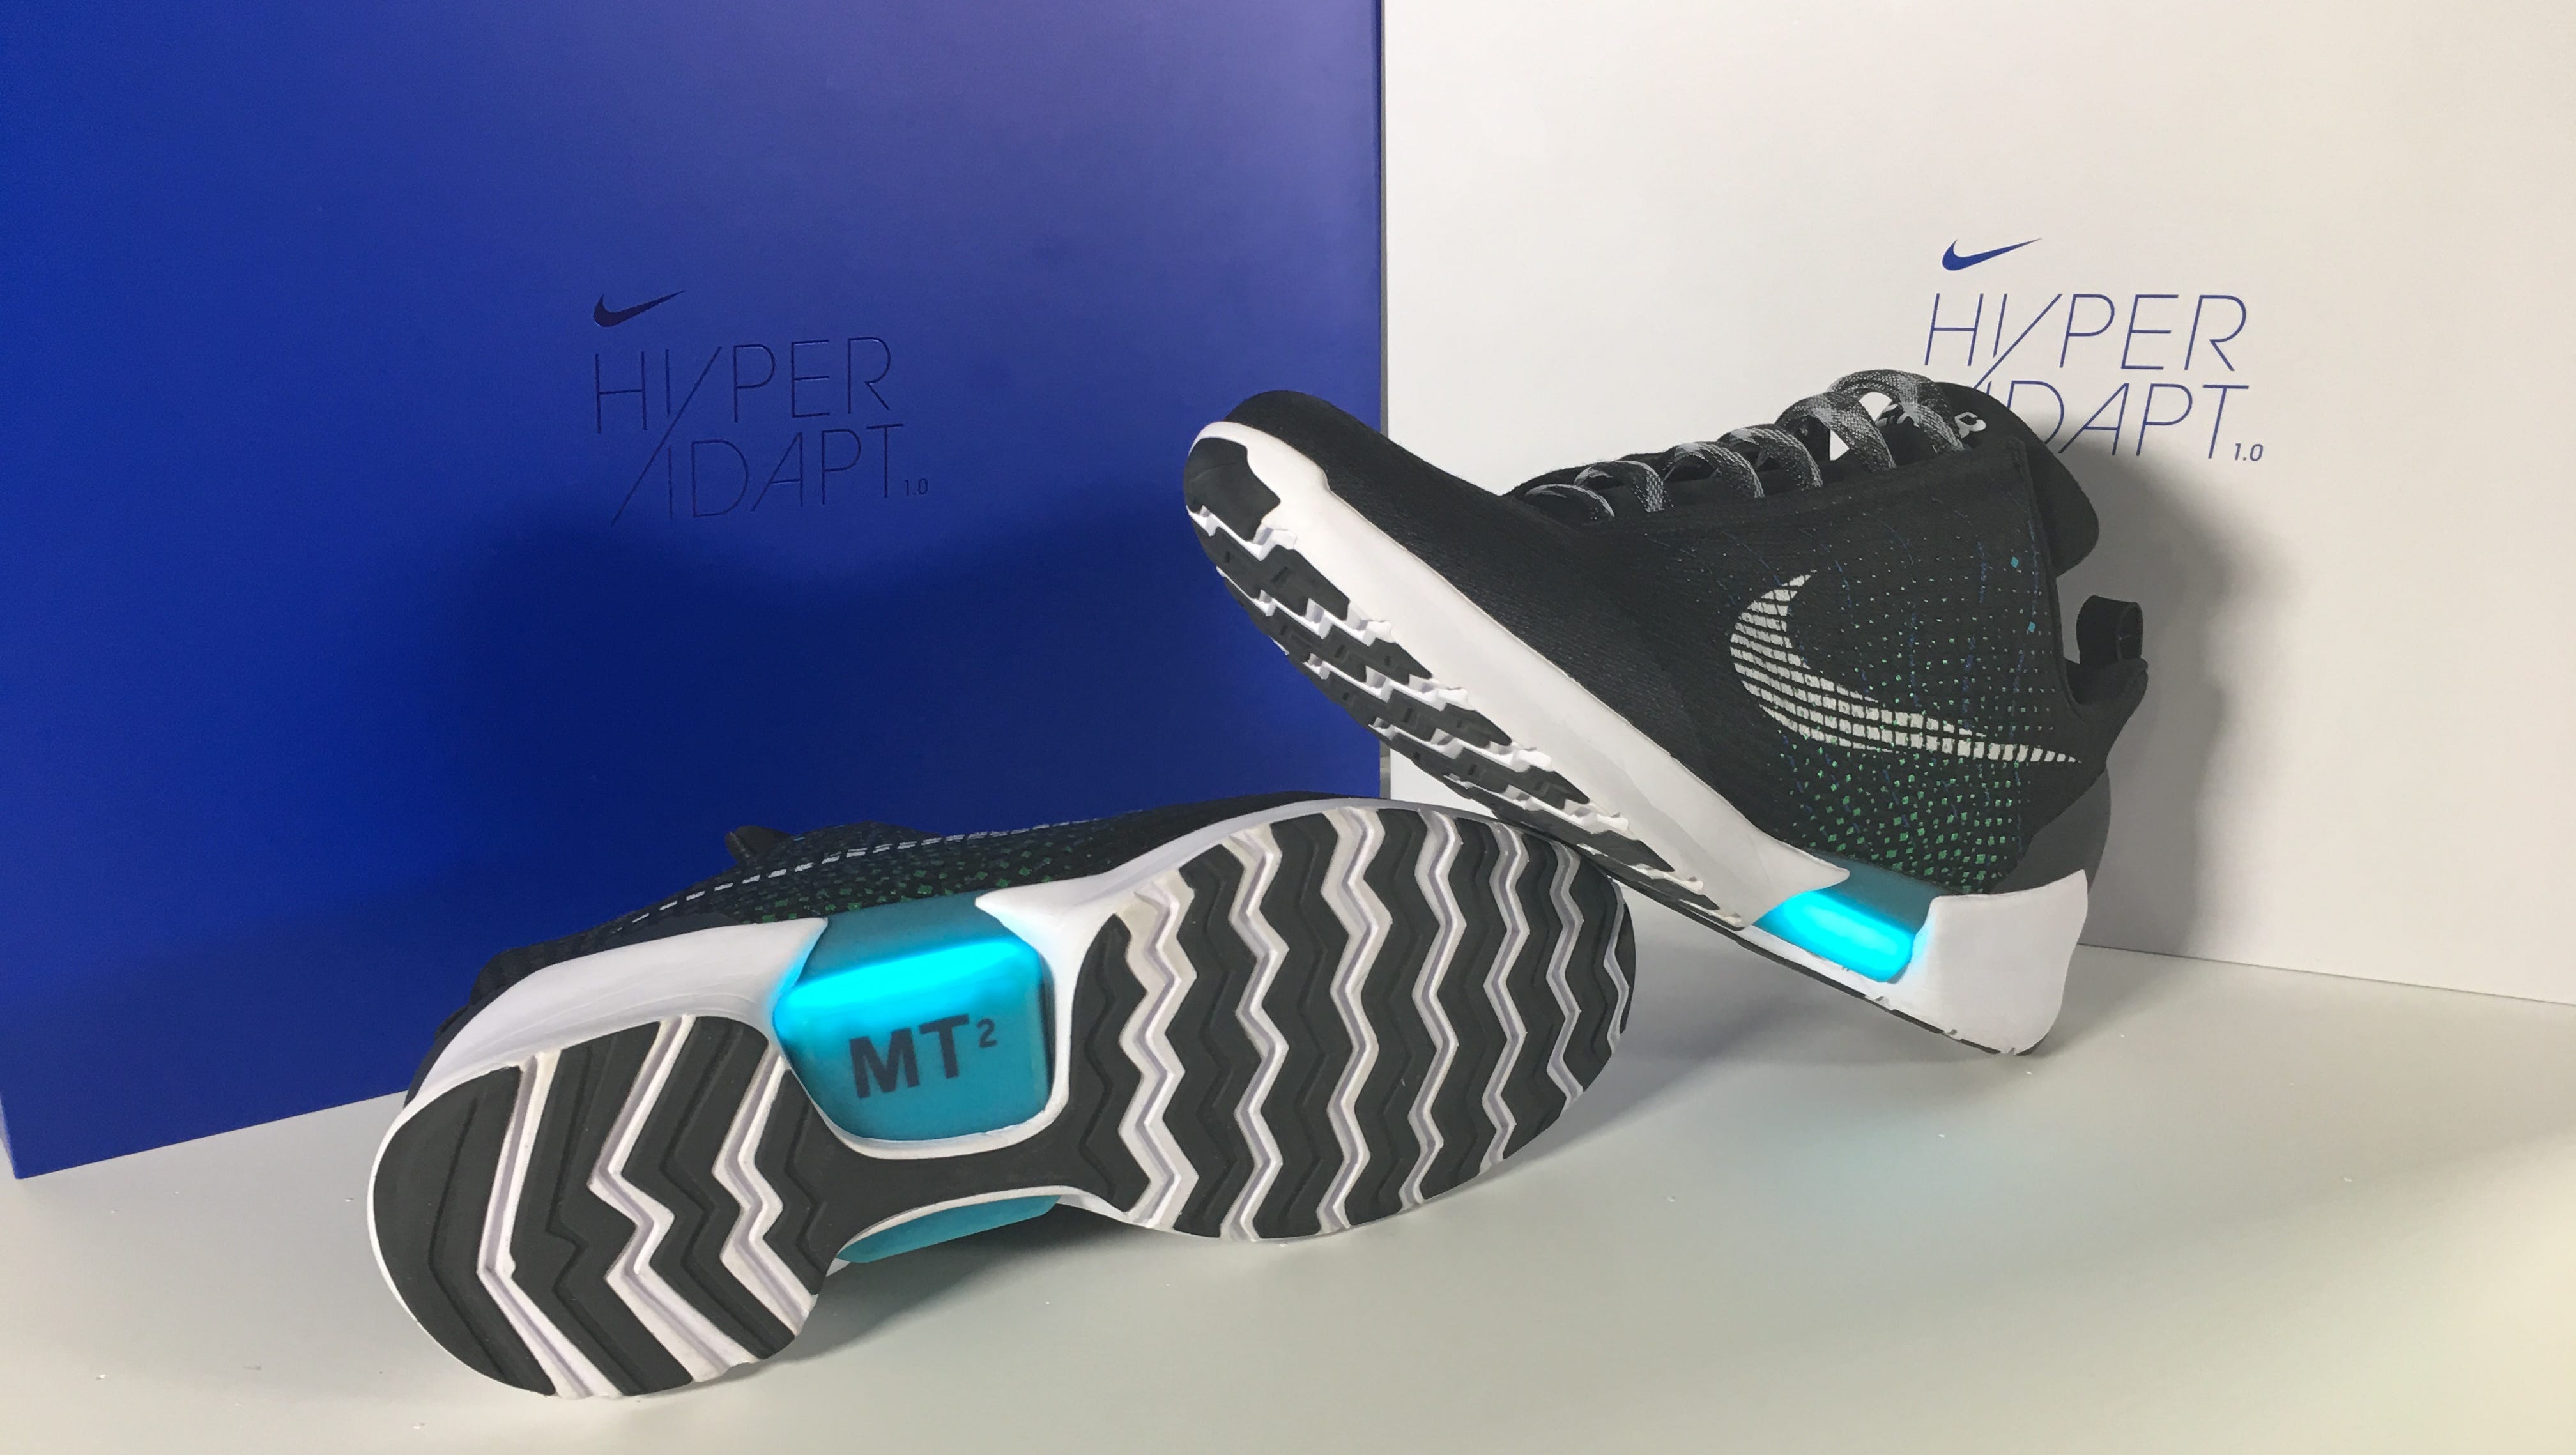 Review: Nike's self-lacing shoes are cool, pricey